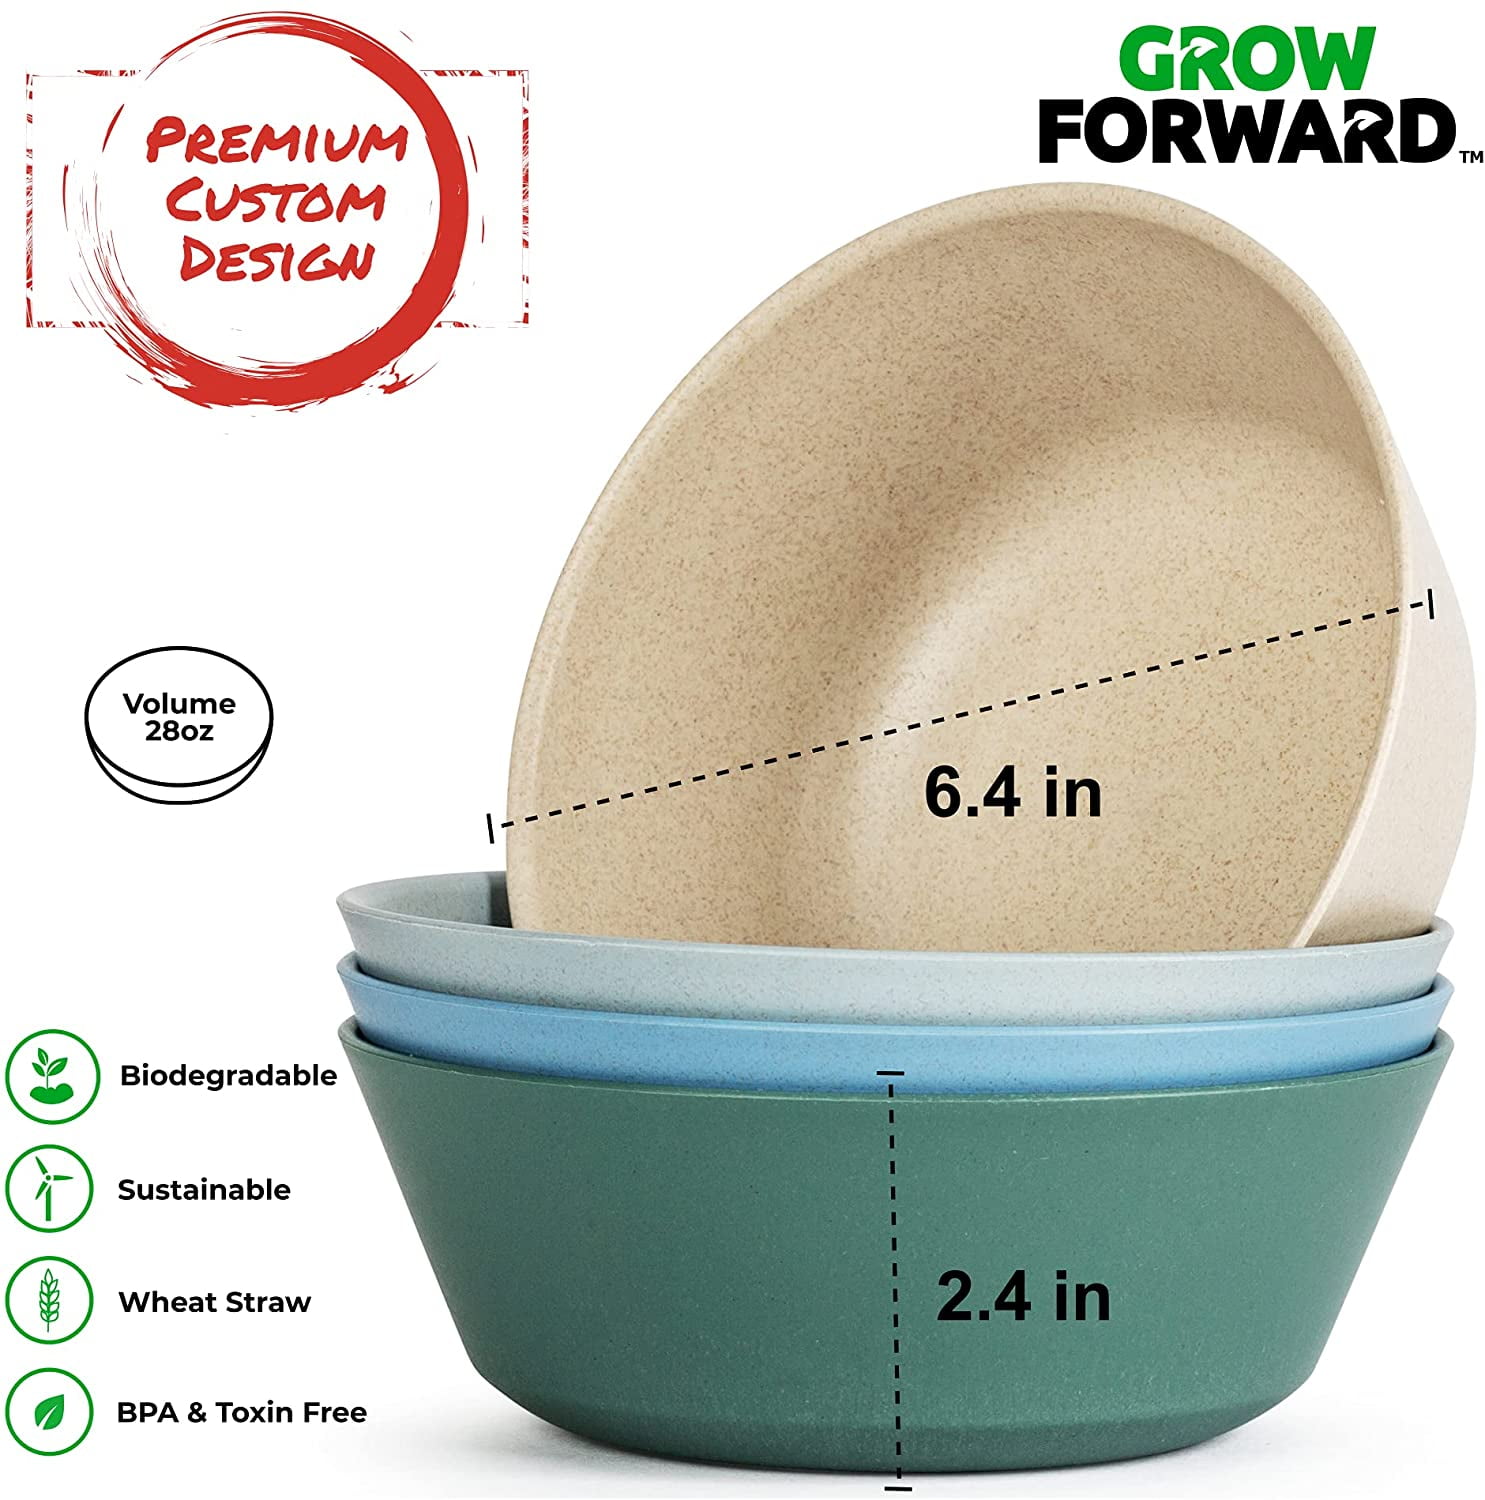 Salad Camping Oasis Grow Forward Premium Wheat Straw Dinnerware Sets Reusable Wheatstraw Dinnerware Plates and Bowls Set for Cereal 8 Piece Unbreakable Microwave Safe Dishes Soup RV Dorm 